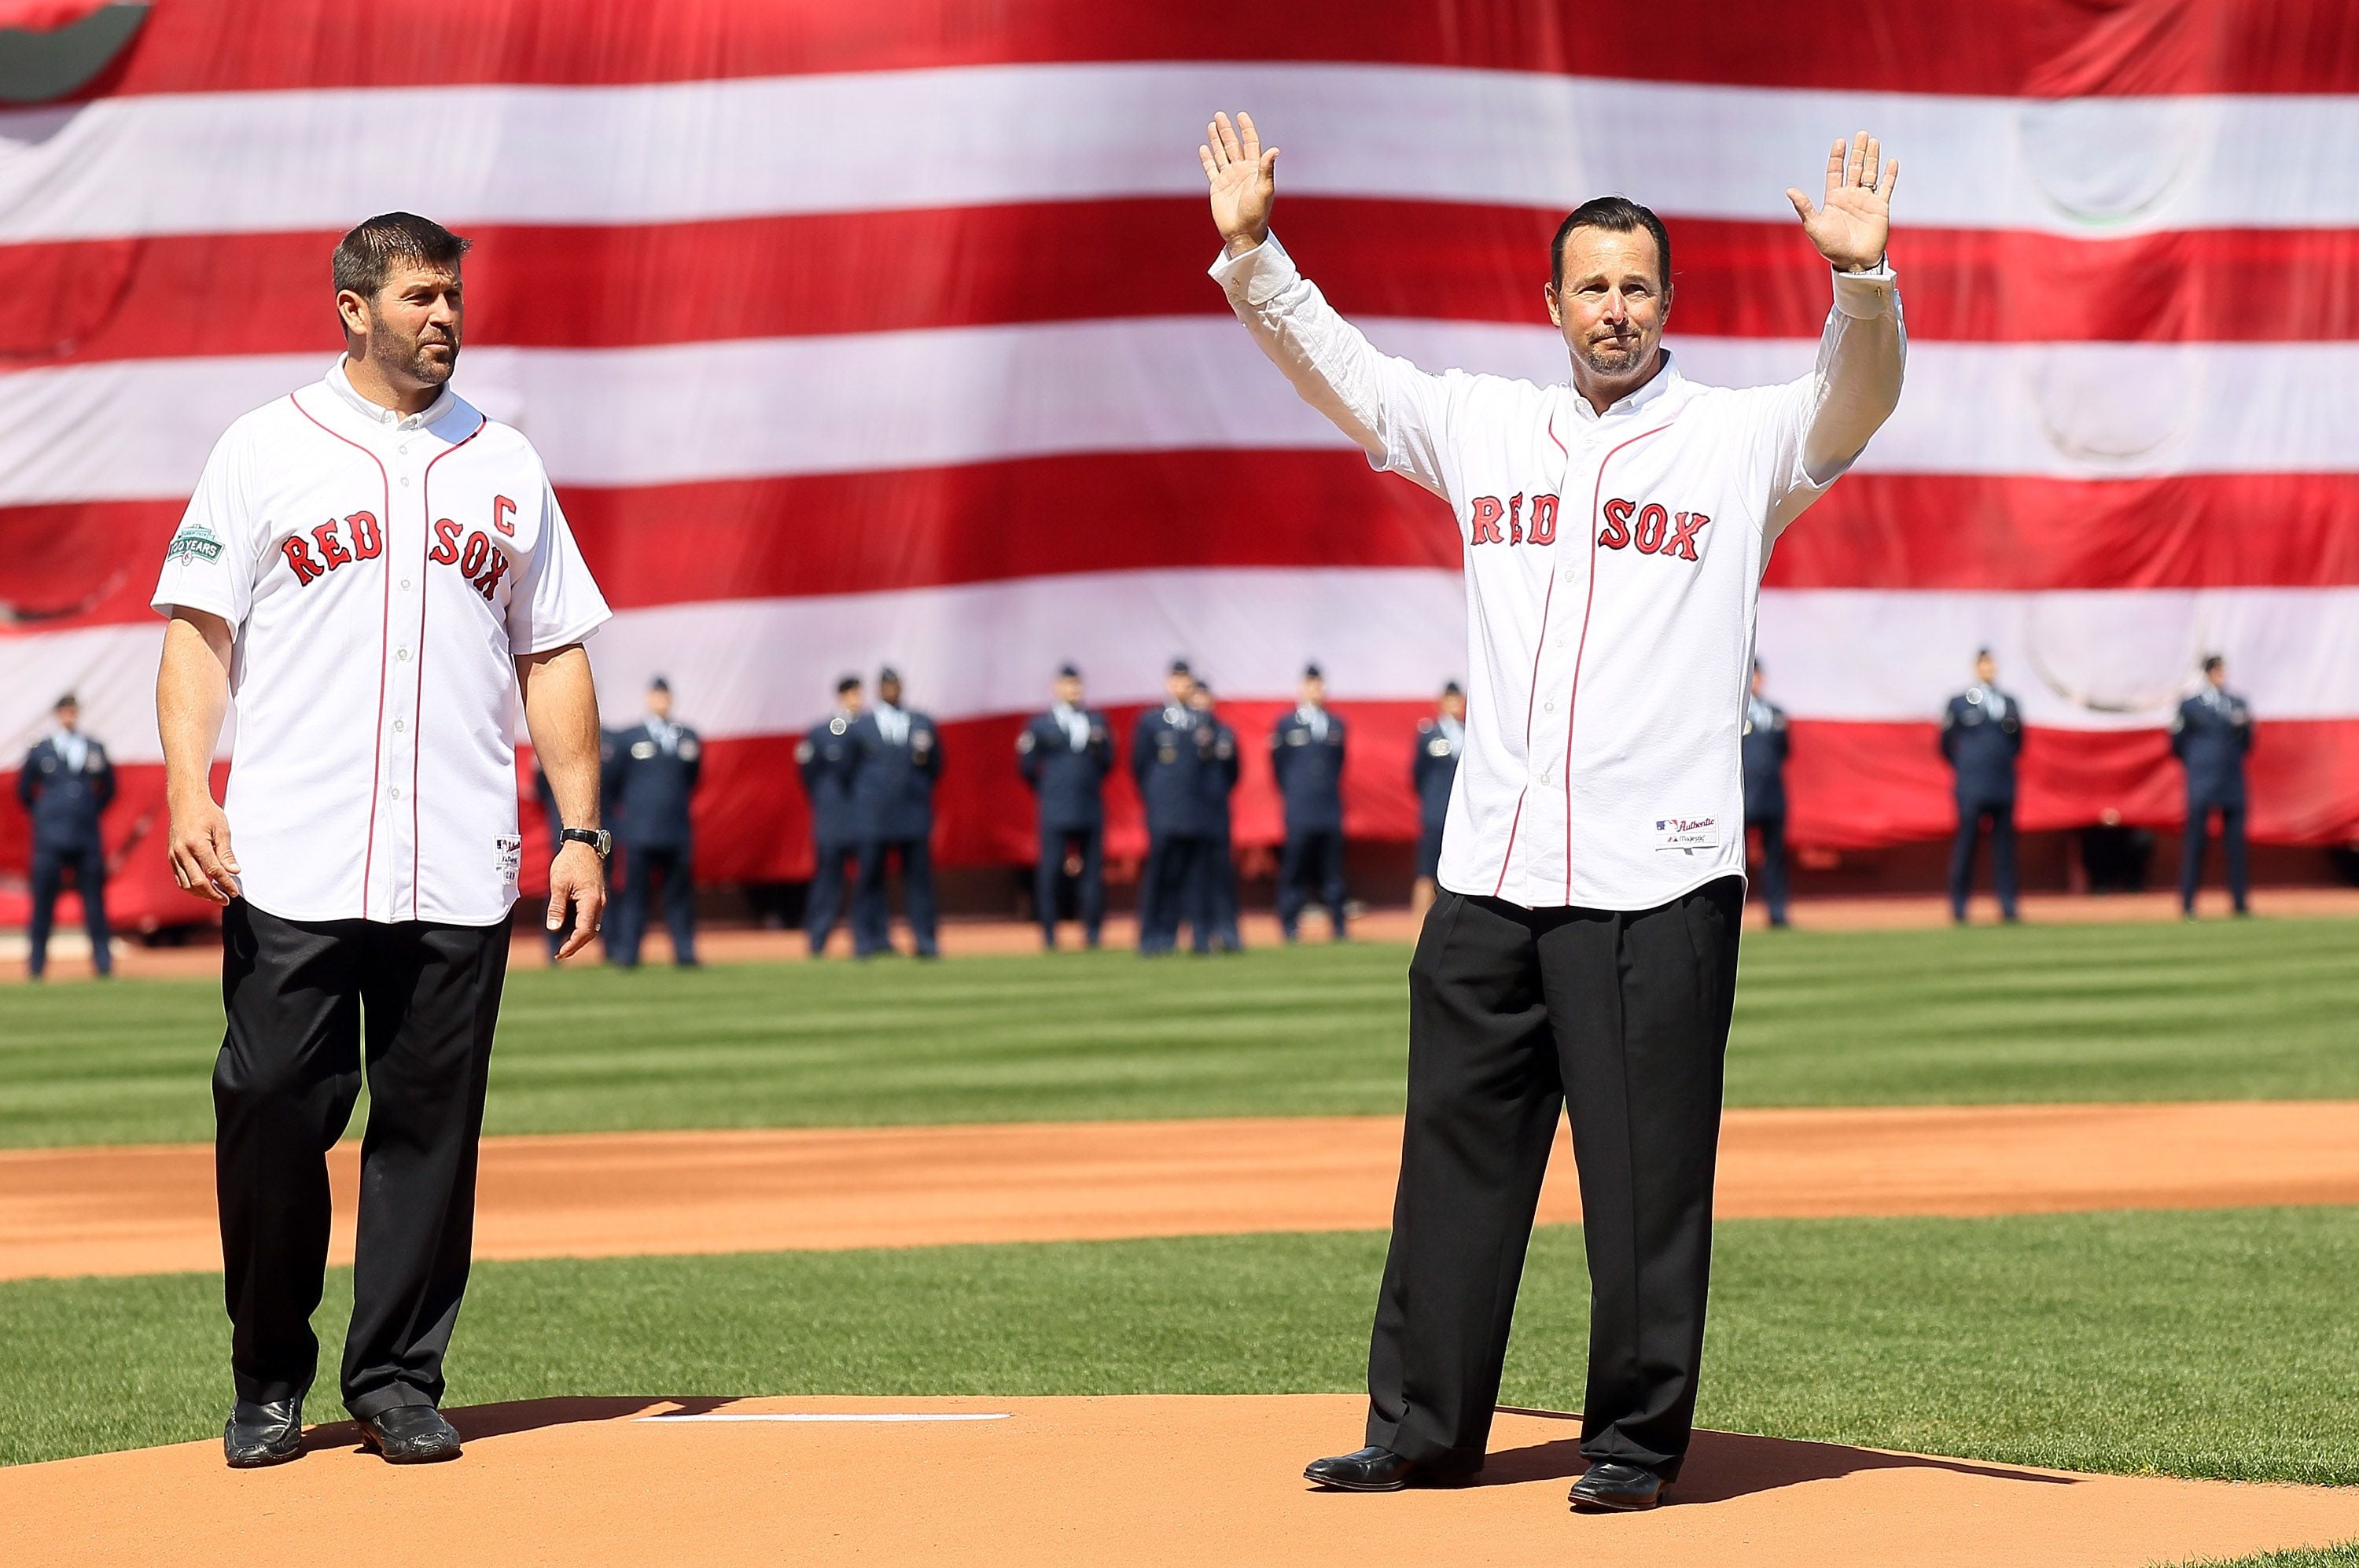 Boston Red Sox Series MVP Mike Lowell and teammate Alex Cora